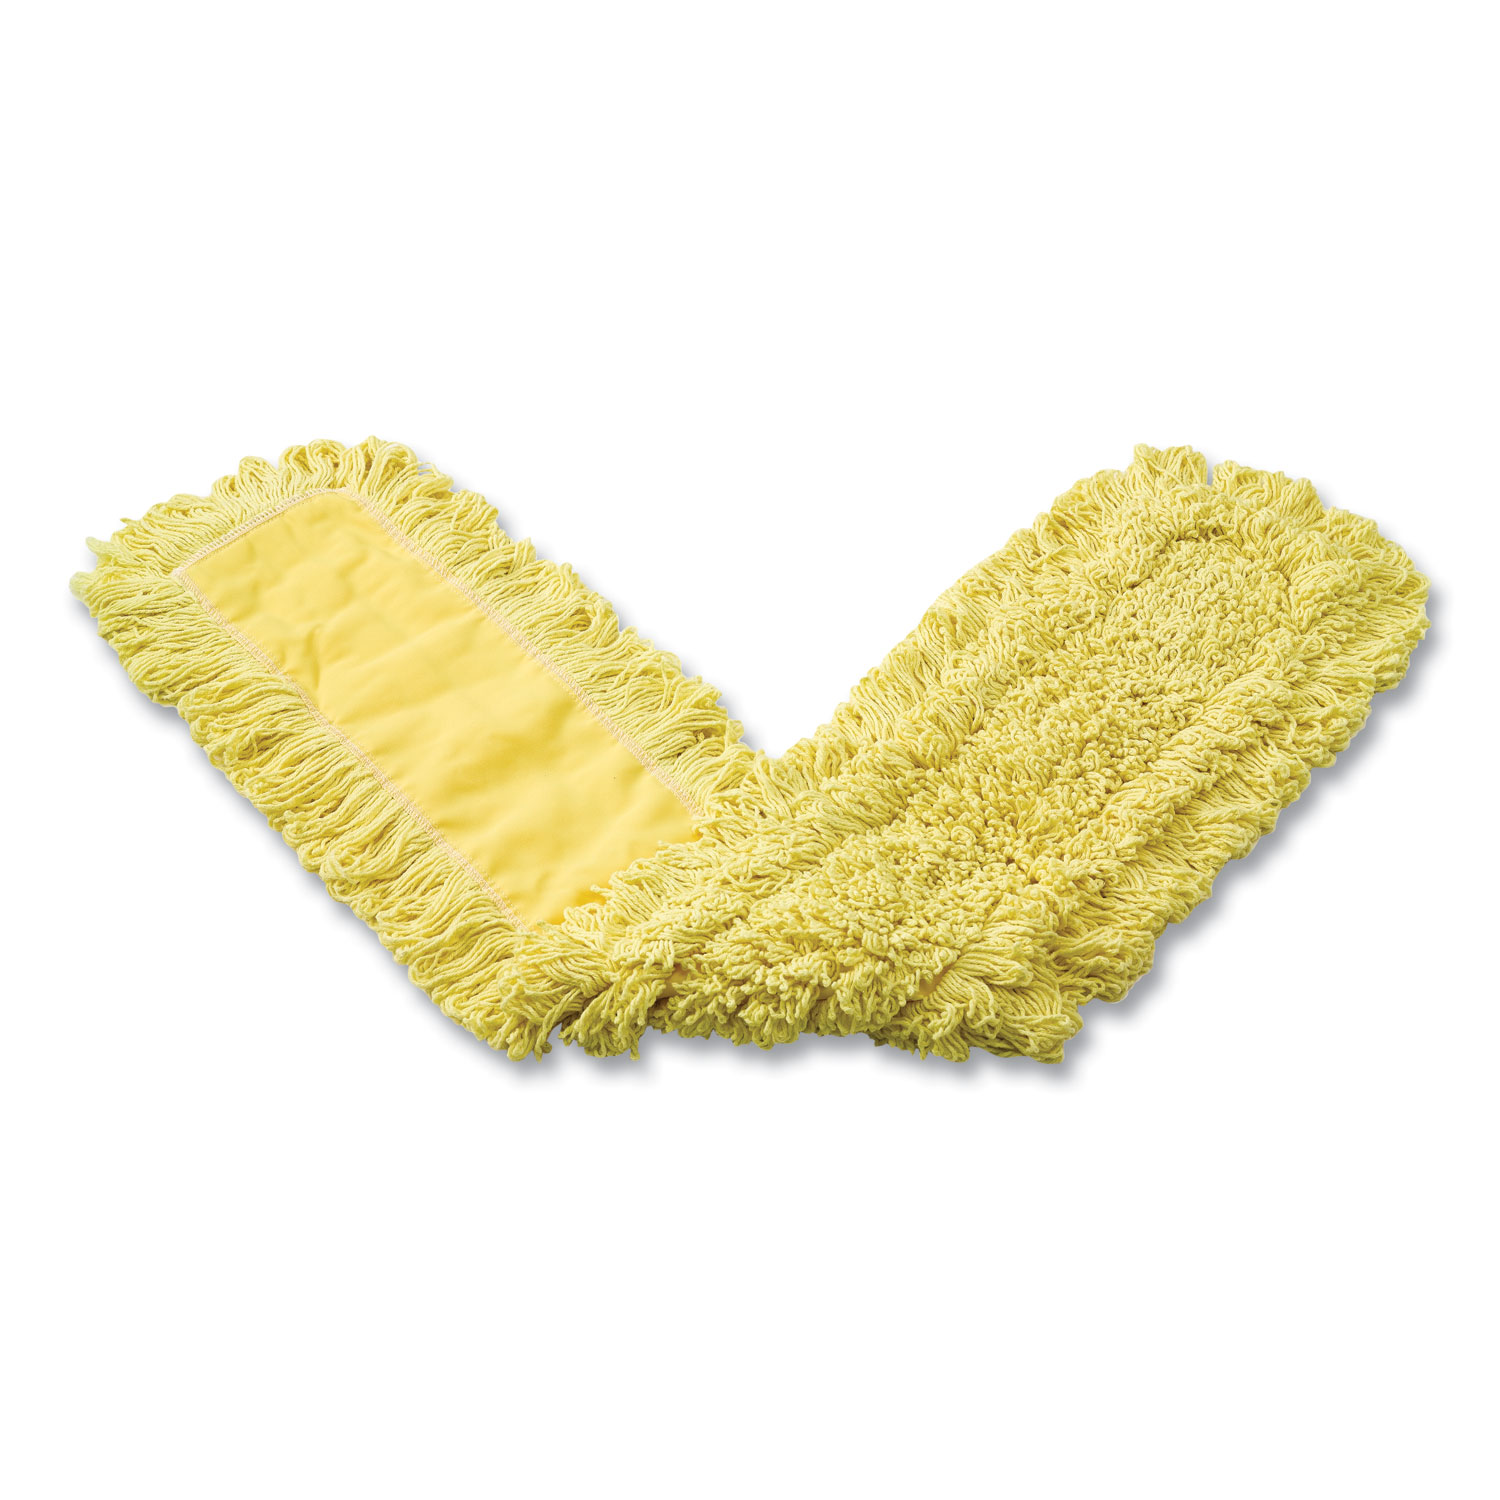 Rubbermaid Hall-Dusting Microfiber Quick Connect Frame 48 1/10W x 3 1/2D Yellow